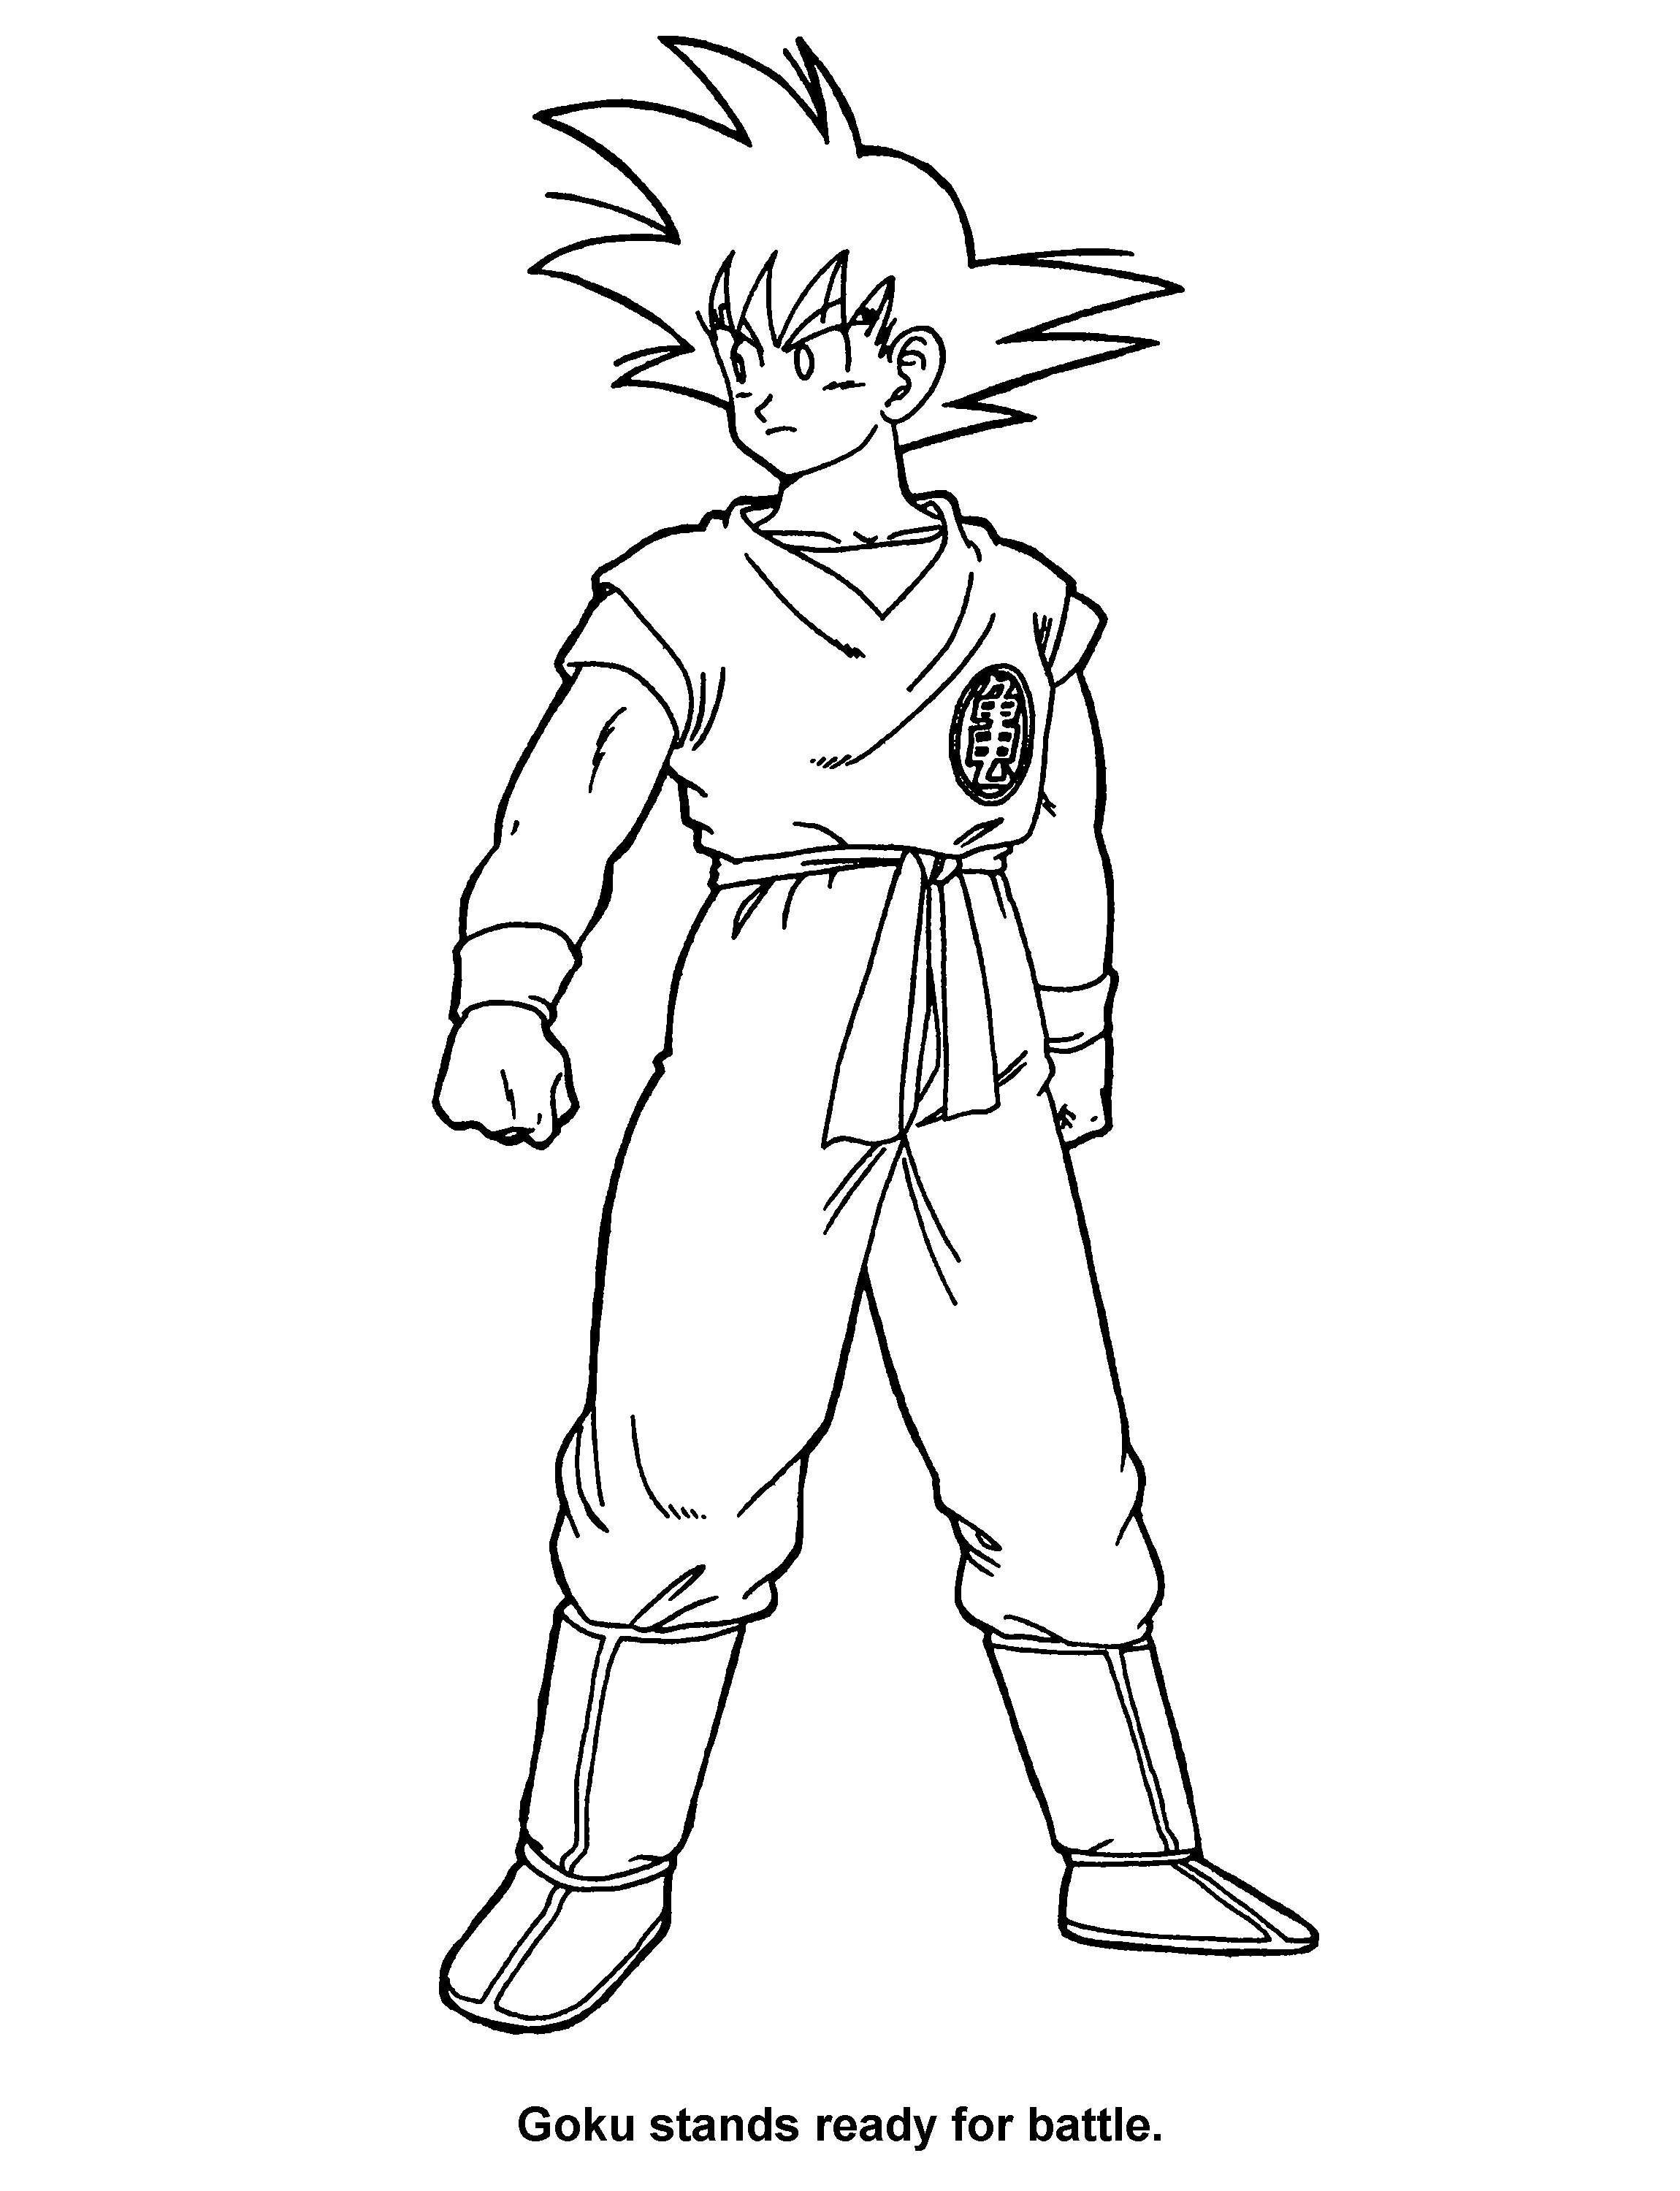 Dragon ball z Coloring Pages  Coloringpages1001.com